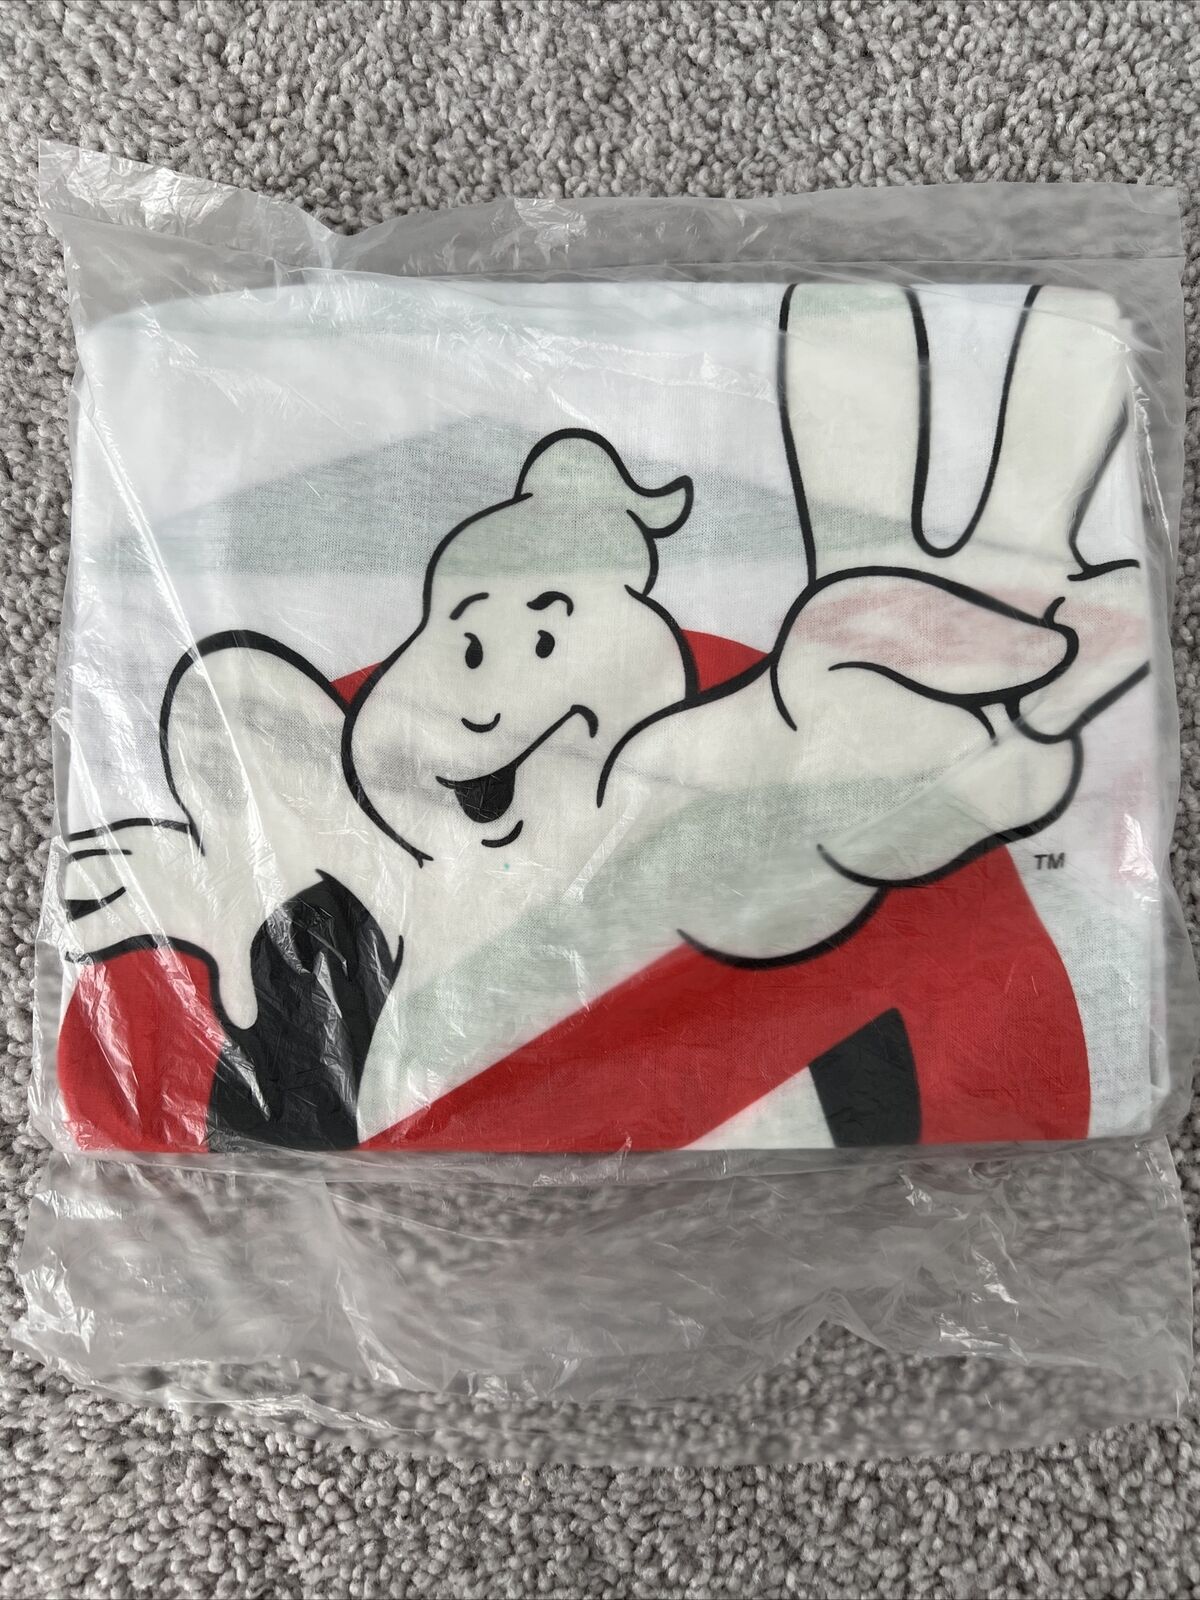 Authentic Mint In Sealed Bag Ghostbusters 2 1989 Movie Promo T-shirt L White